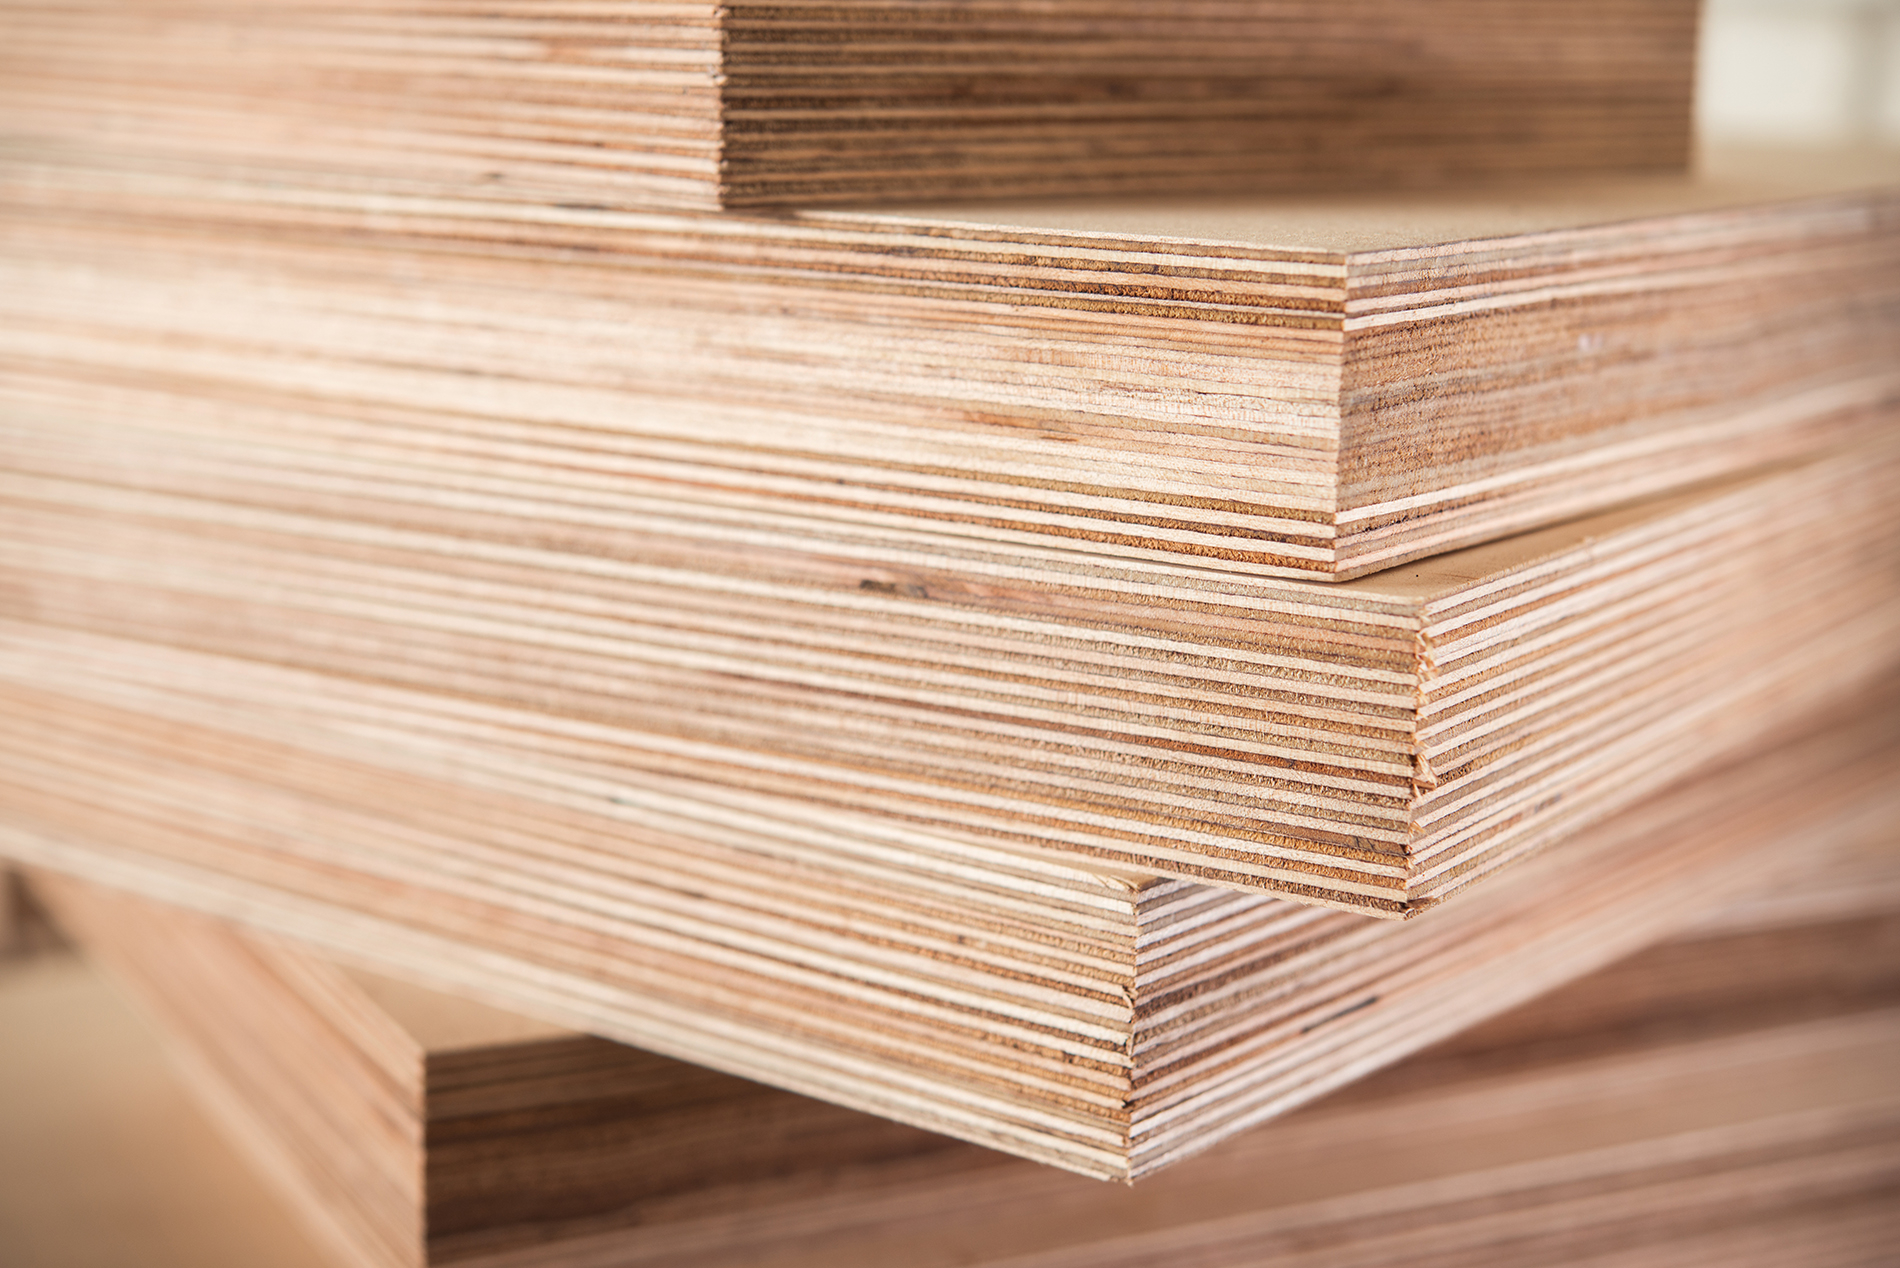 Prices For Lumber And Other Construction Materials Fall In September